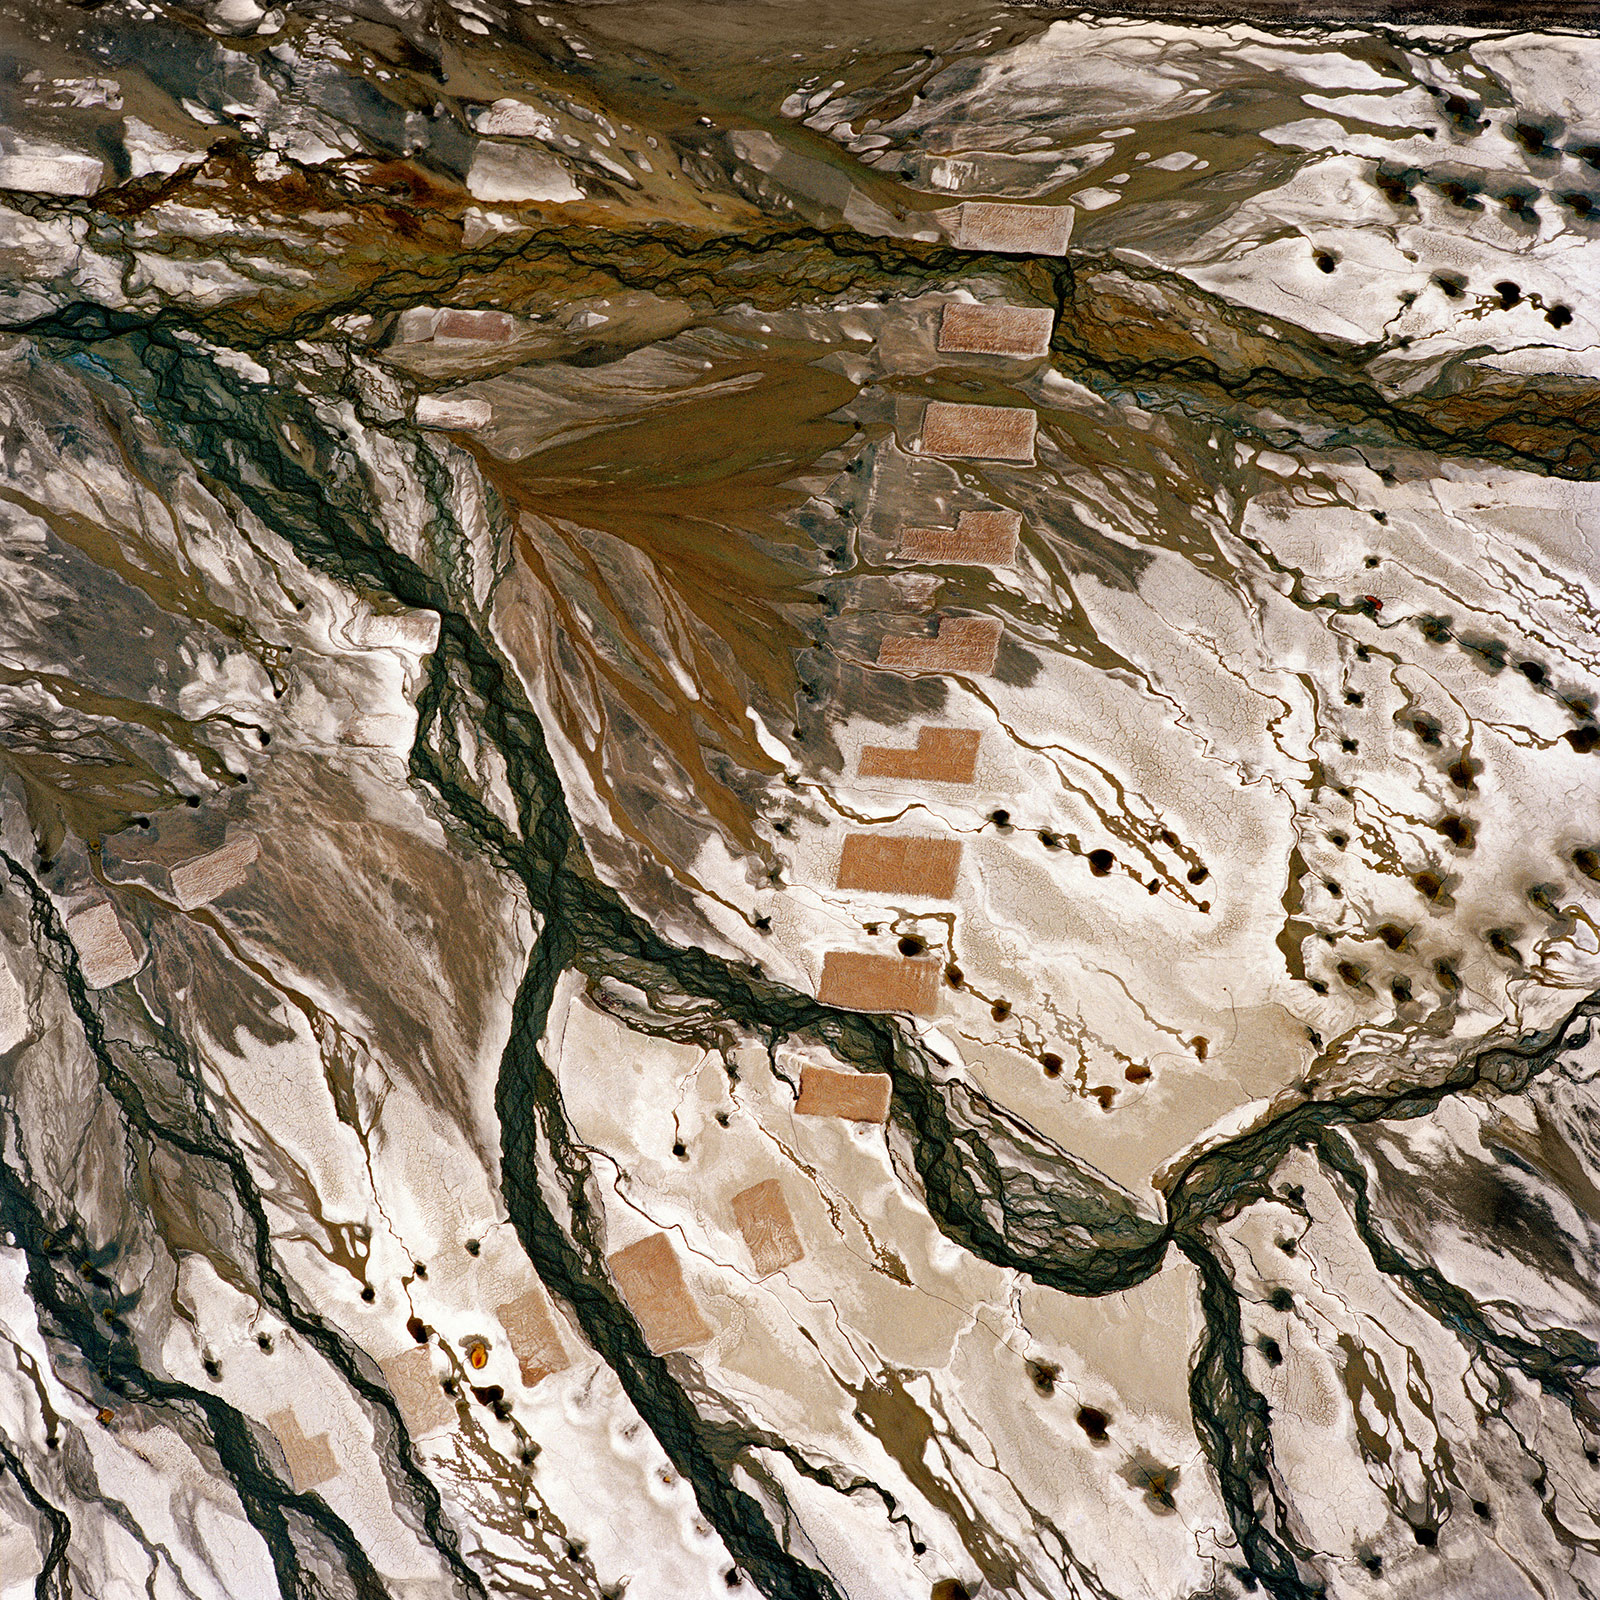 abstract patterns in dry lakebed